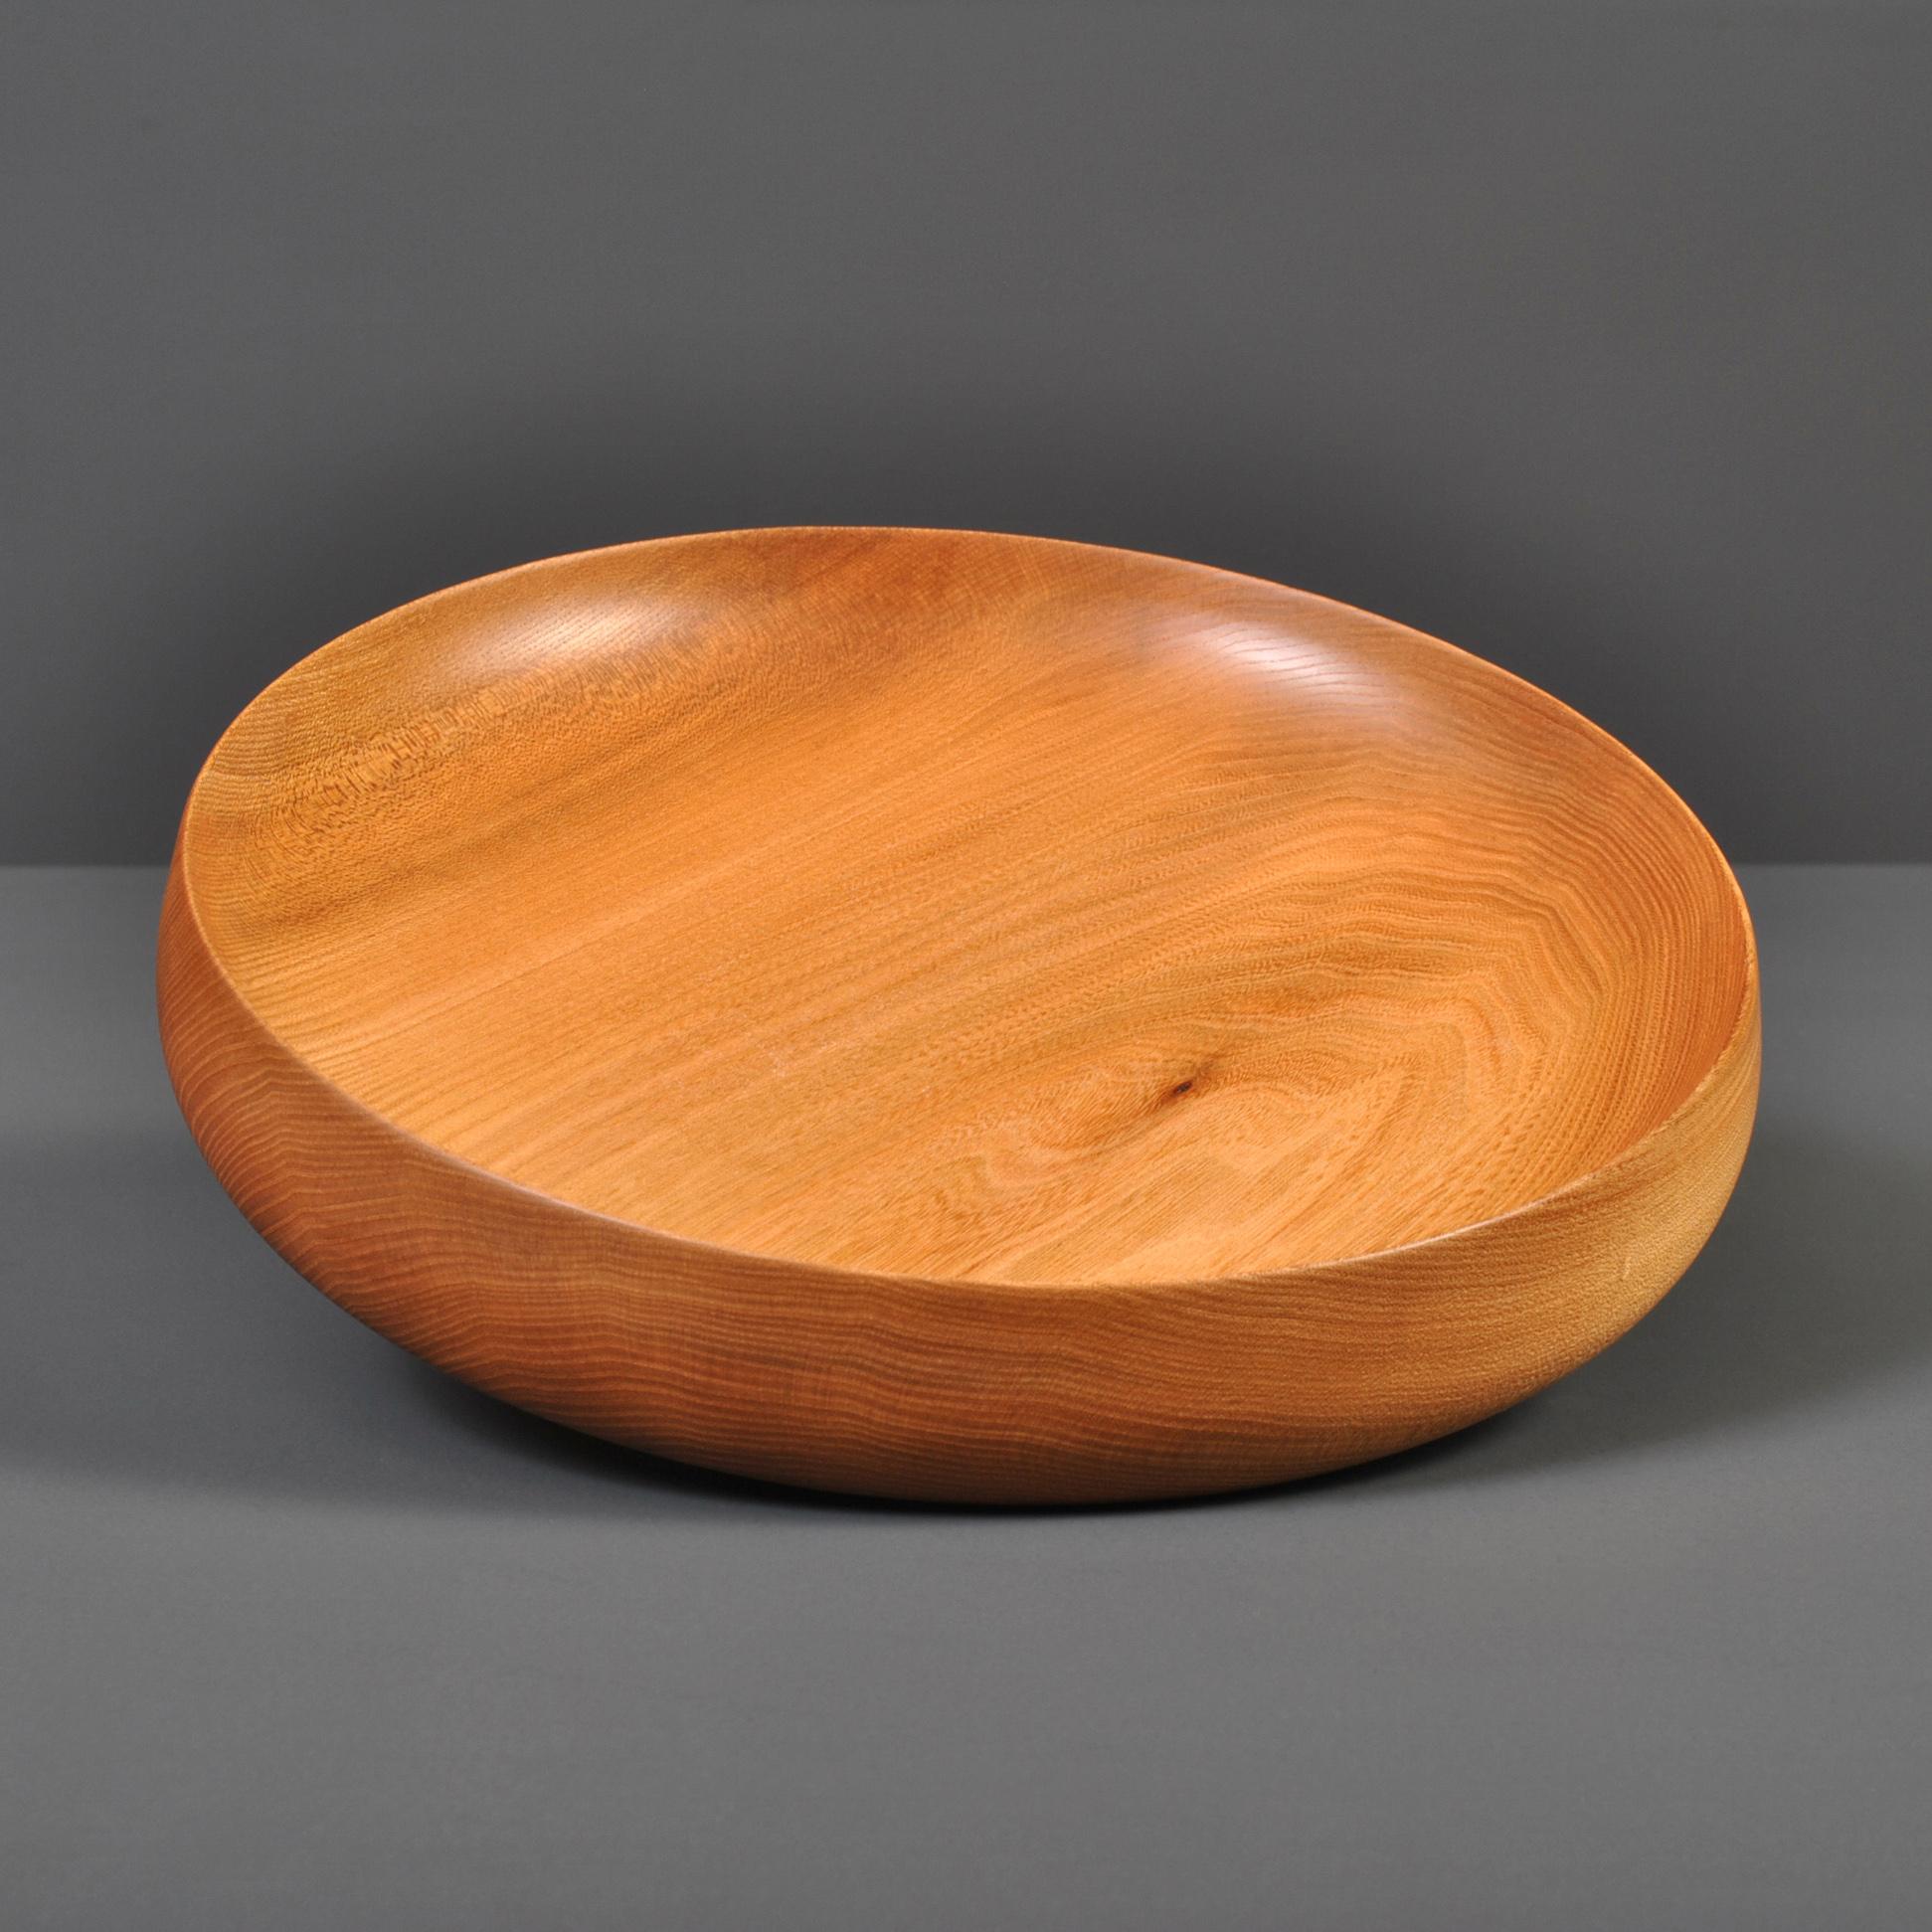 Fine traditionally hand-crafted and turned Elm platter - bowl. These are handmade to the very best quality in London.
Finished in food safe oils.
This bright piece of Scottish Elm was turned by hand to our unique specific platter shape. Inspired by